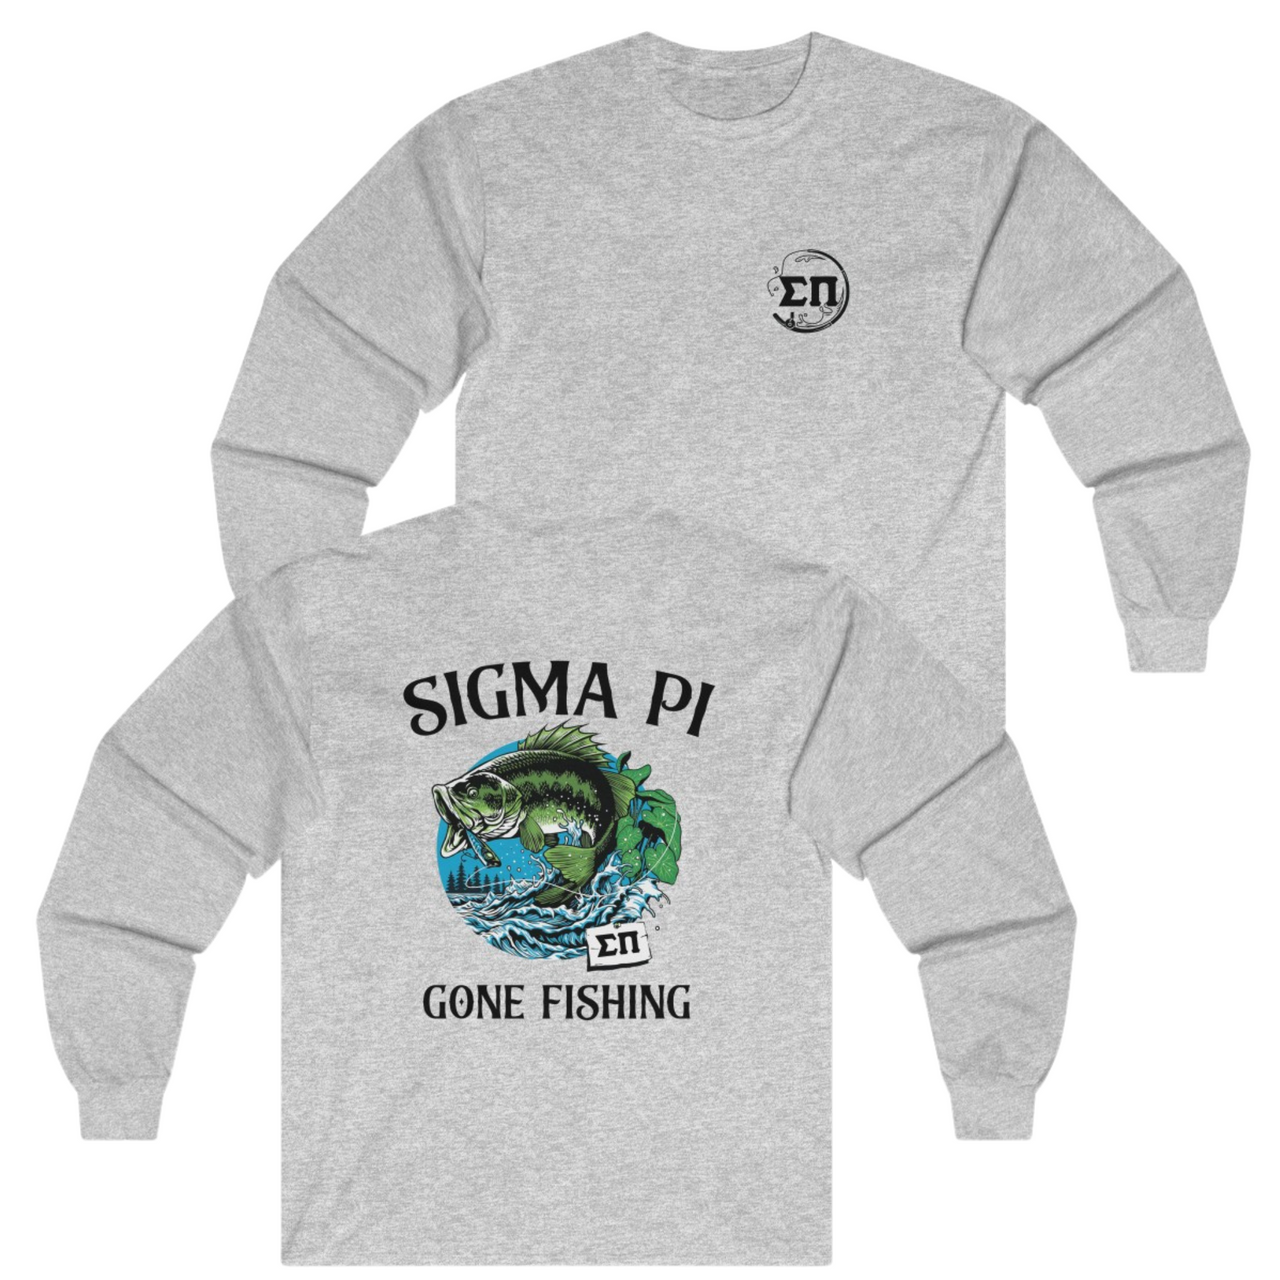 Grey Sigma Pi Graphic Long Sleeve T-Shirt | Gone Fishing | Sigma Pi Apparel and Merchandise 